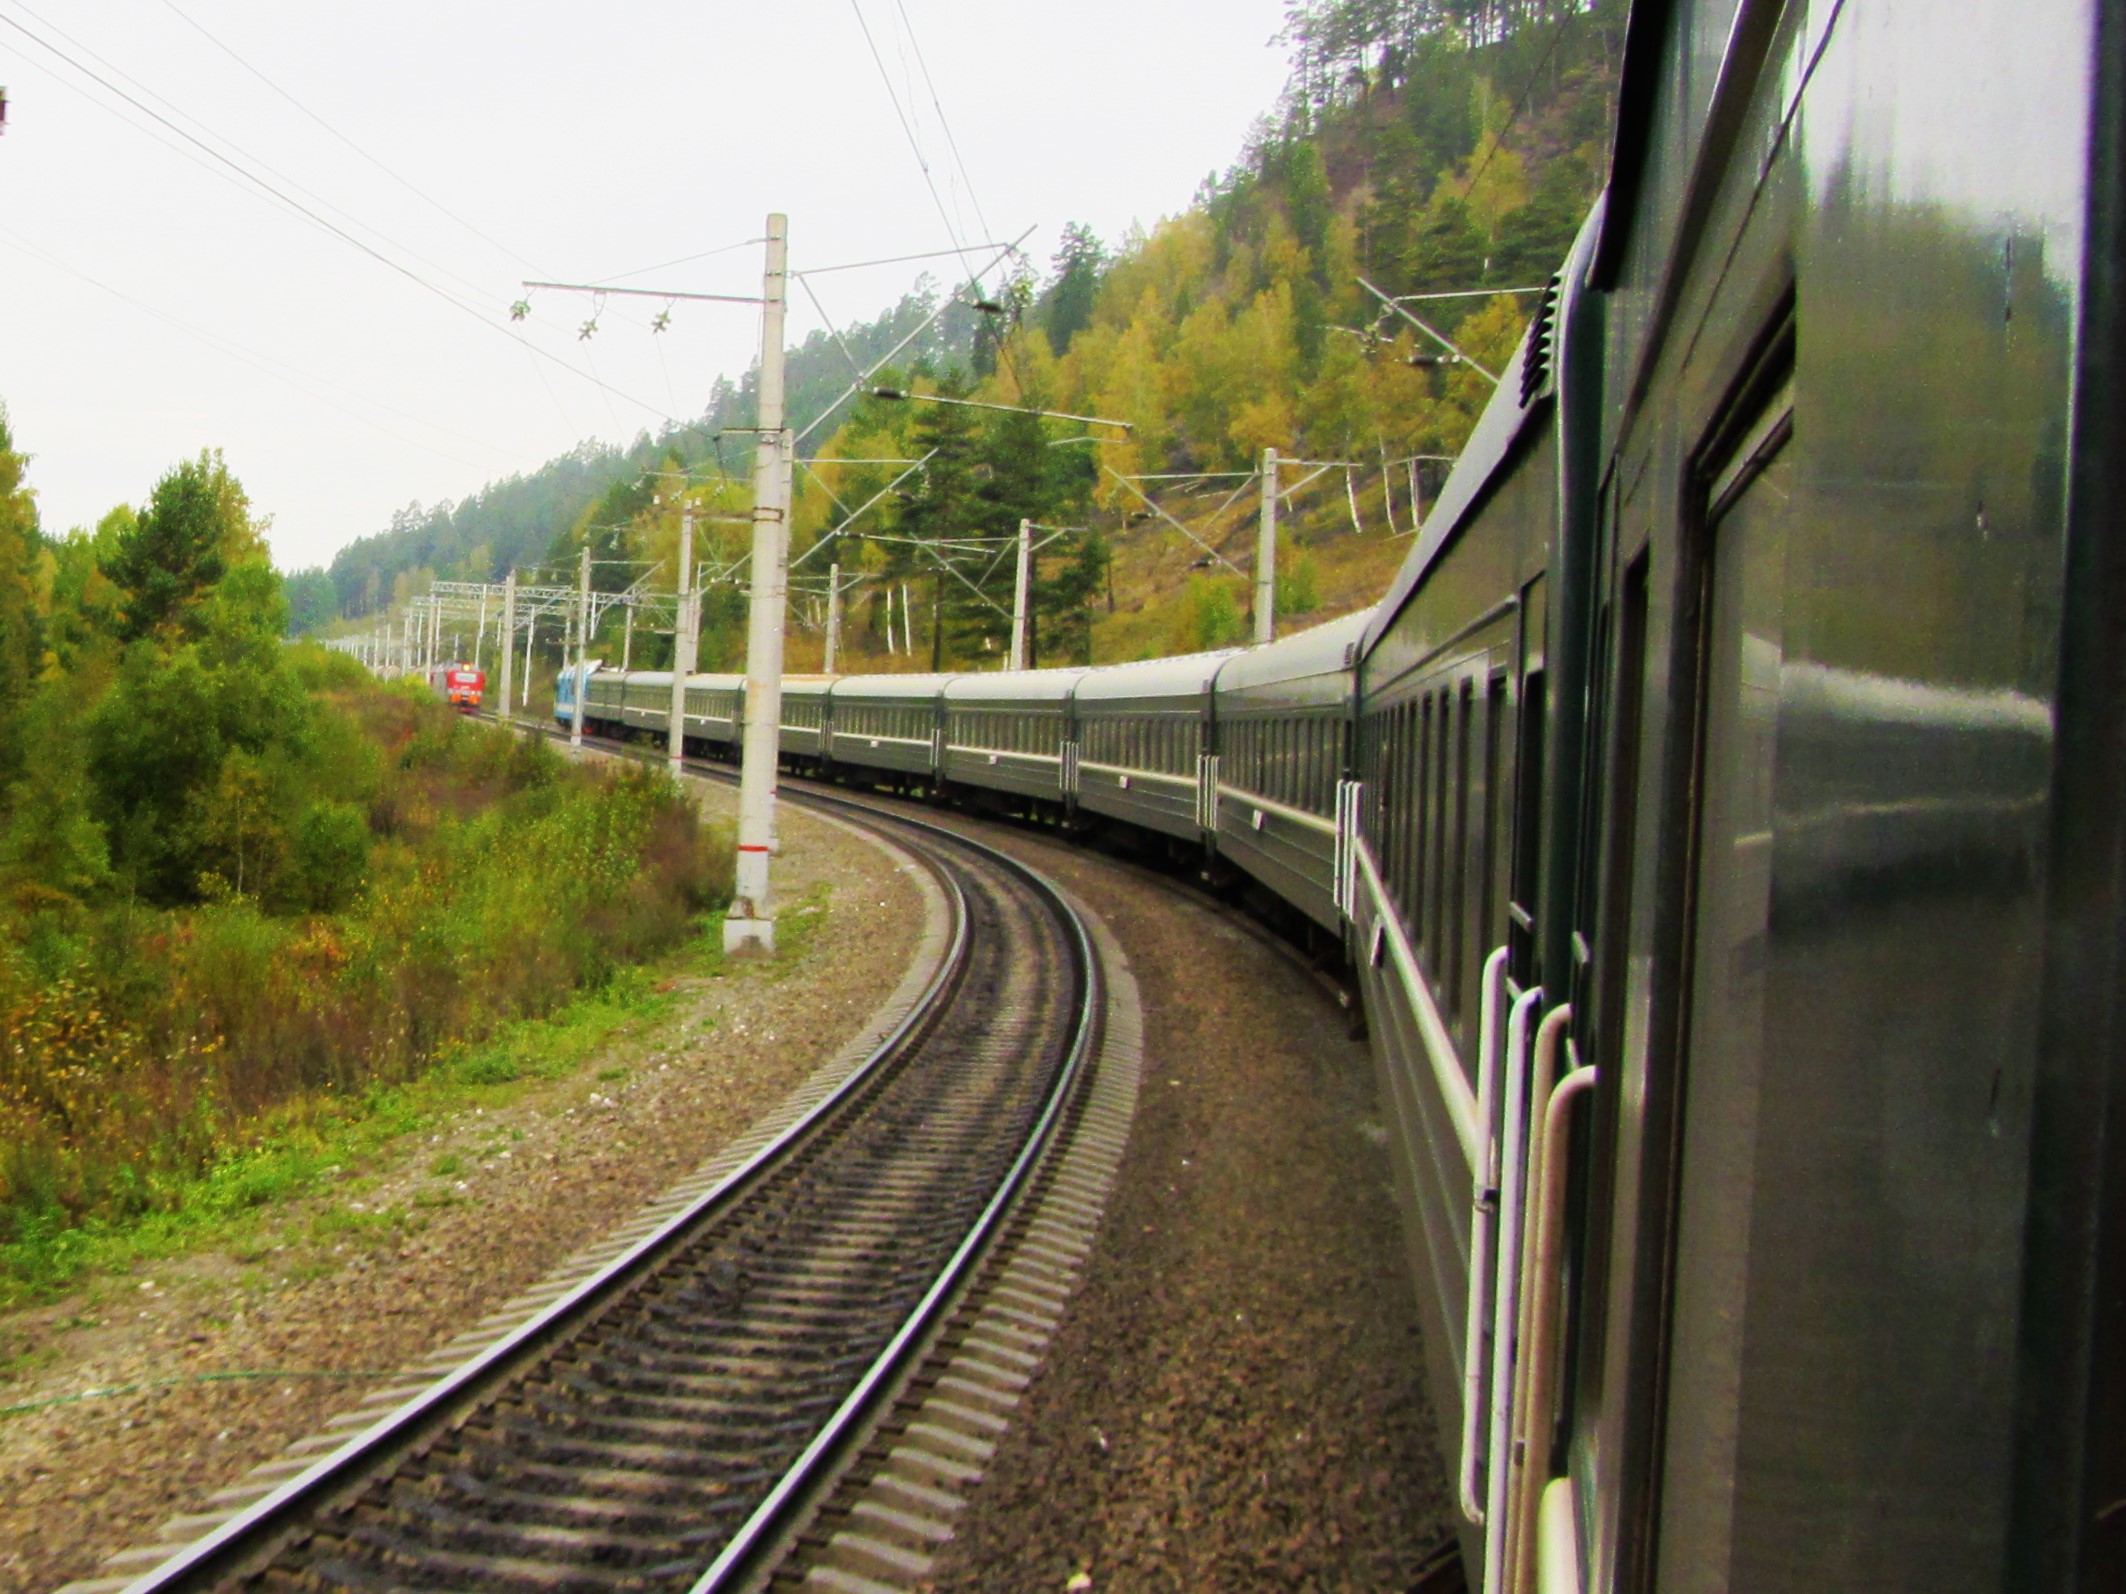 Photo of the day show the entire Trans-Siberian train on the move